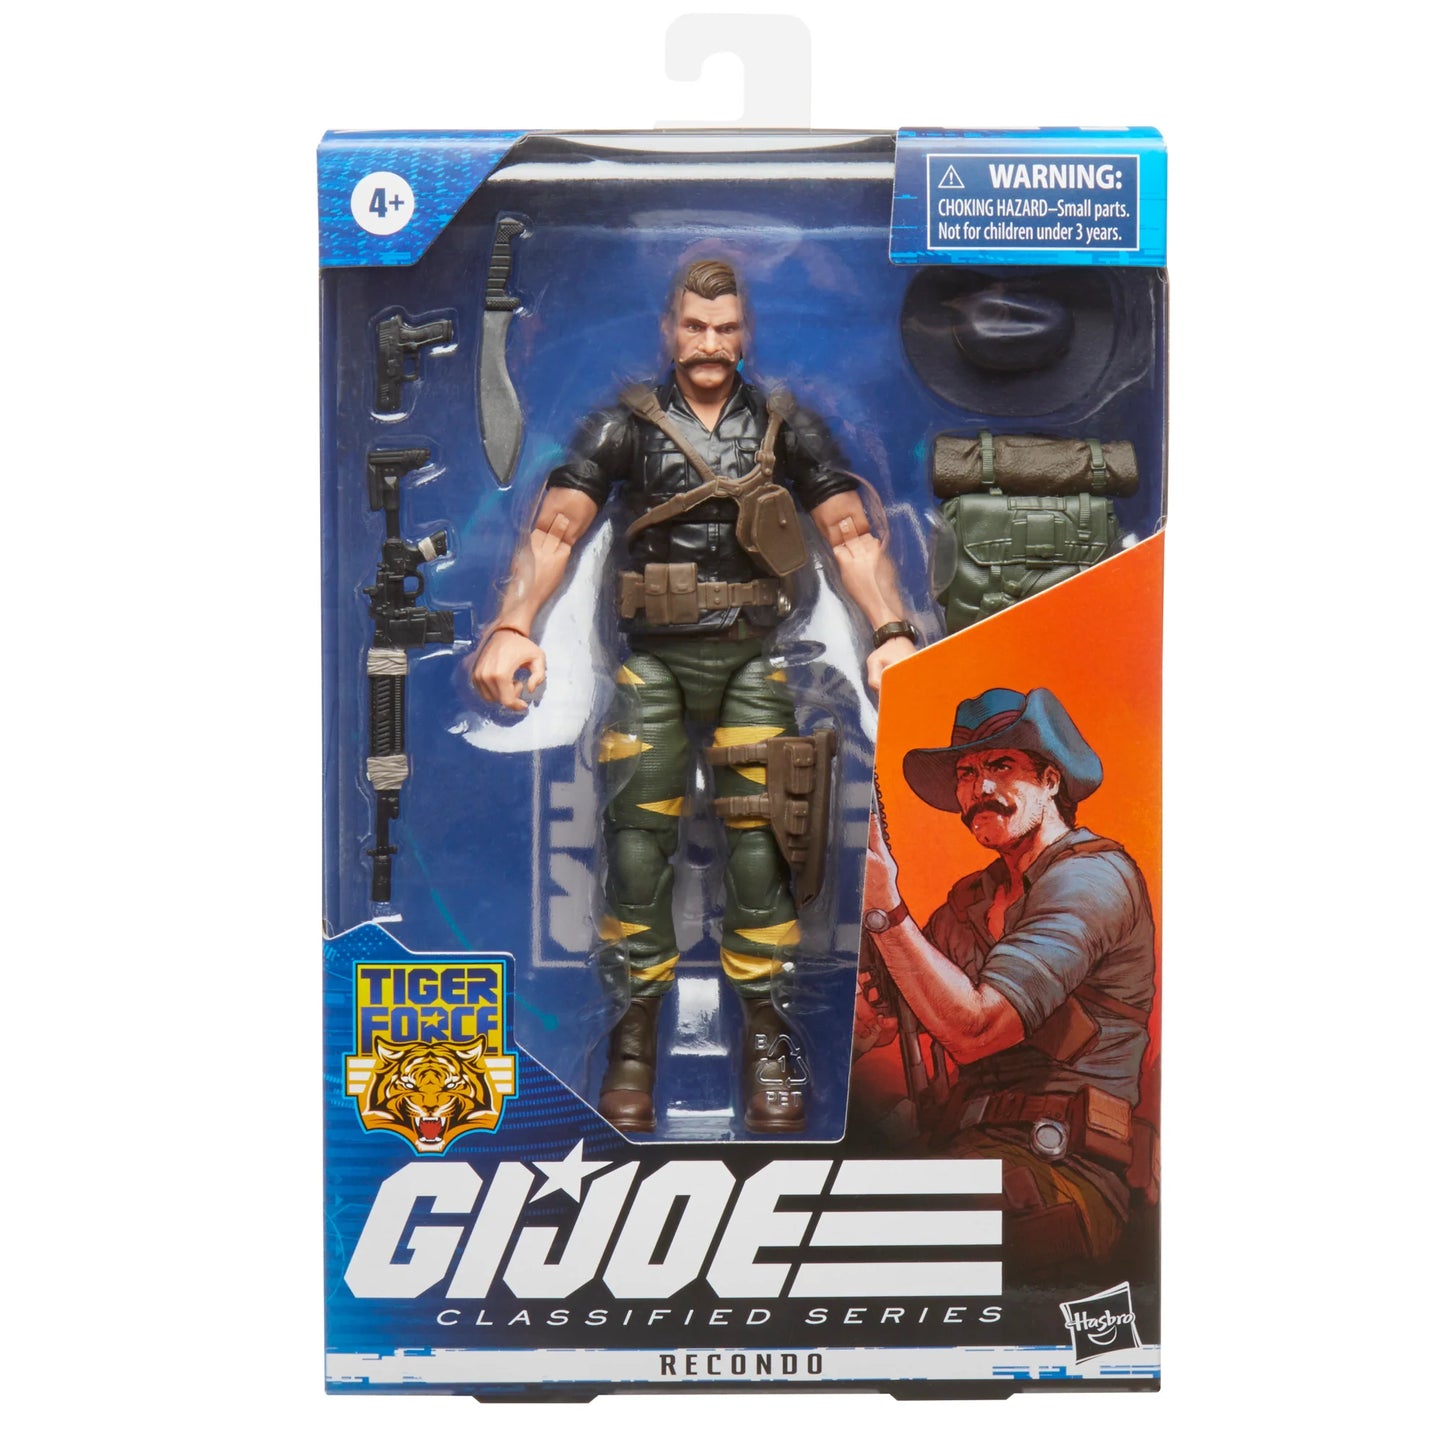 G.I. Joe Classified Series Tiger Force 6-inch Recondo Action Figure, Accessories